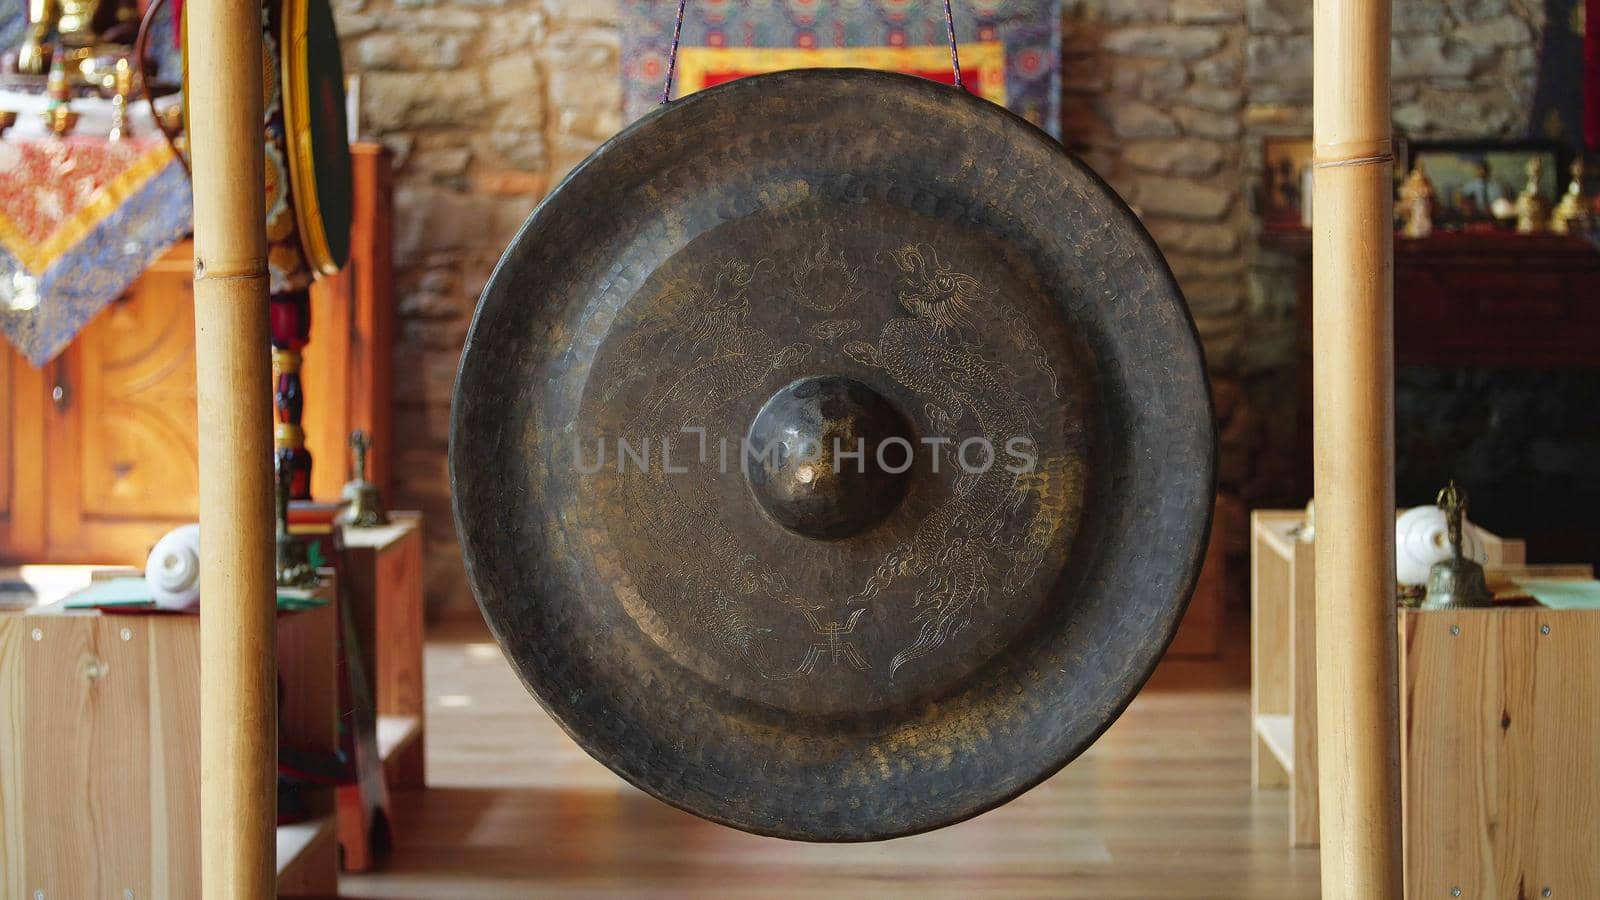 Asian religious metal gong to alert monks of prayer time - religion, tradition and lifestyle concept by apavlin